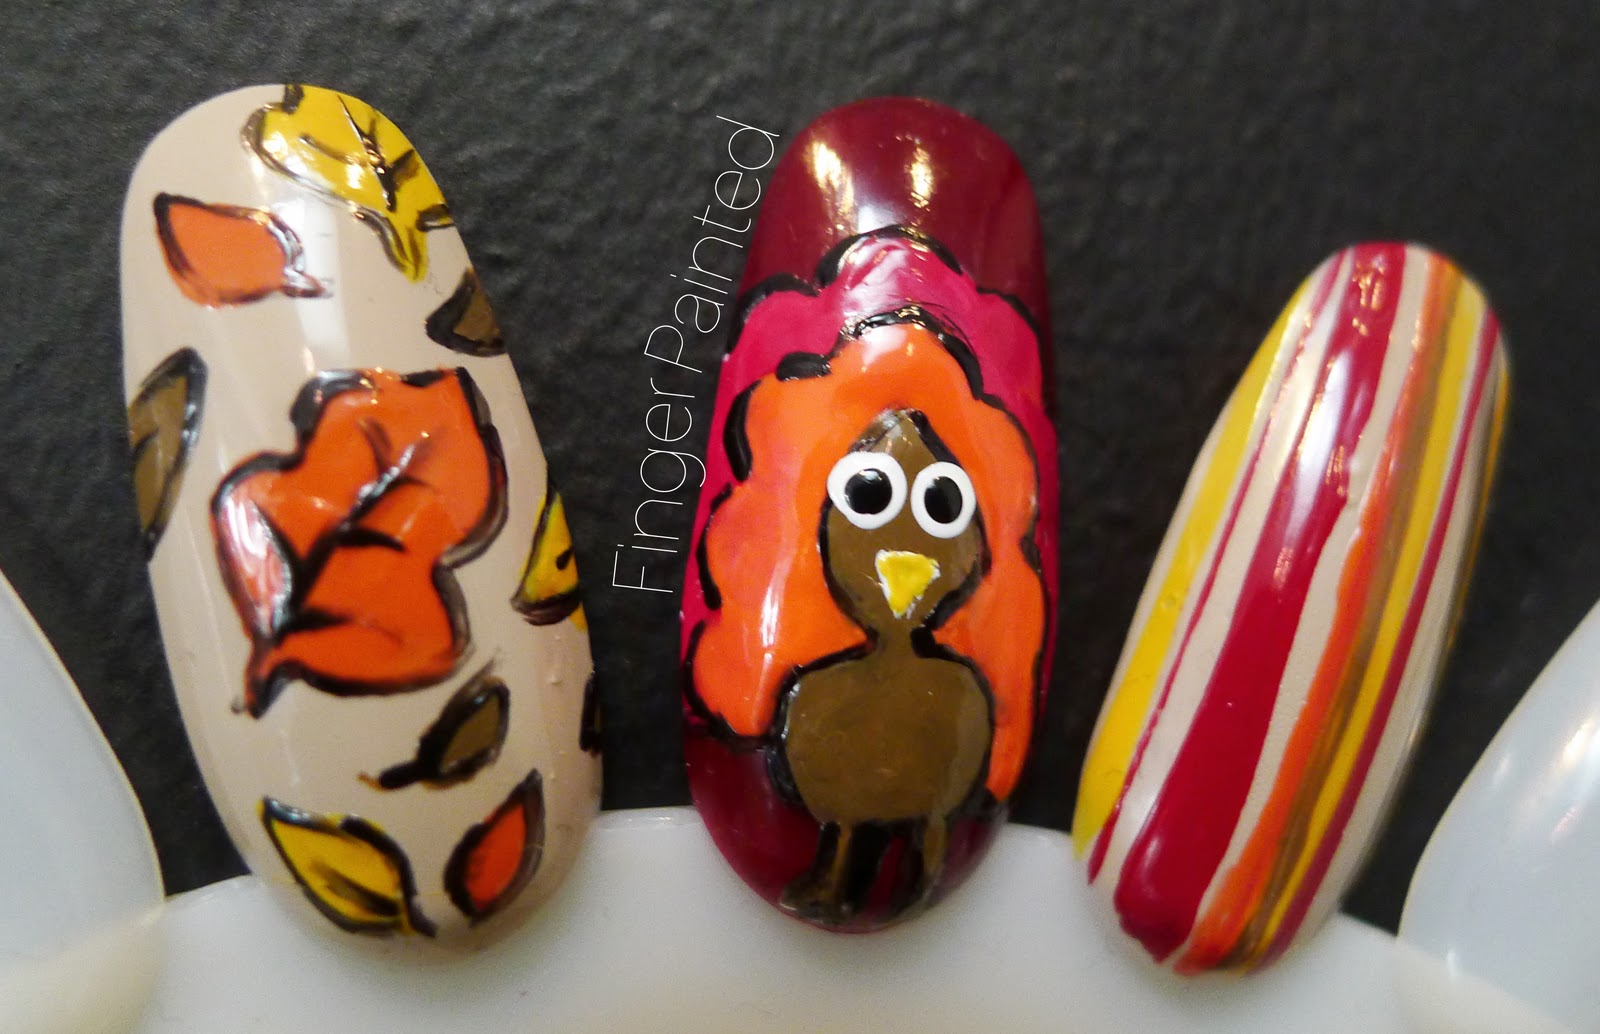 Since Thanksgiving is next week I did some Thanksgiving themed nails!